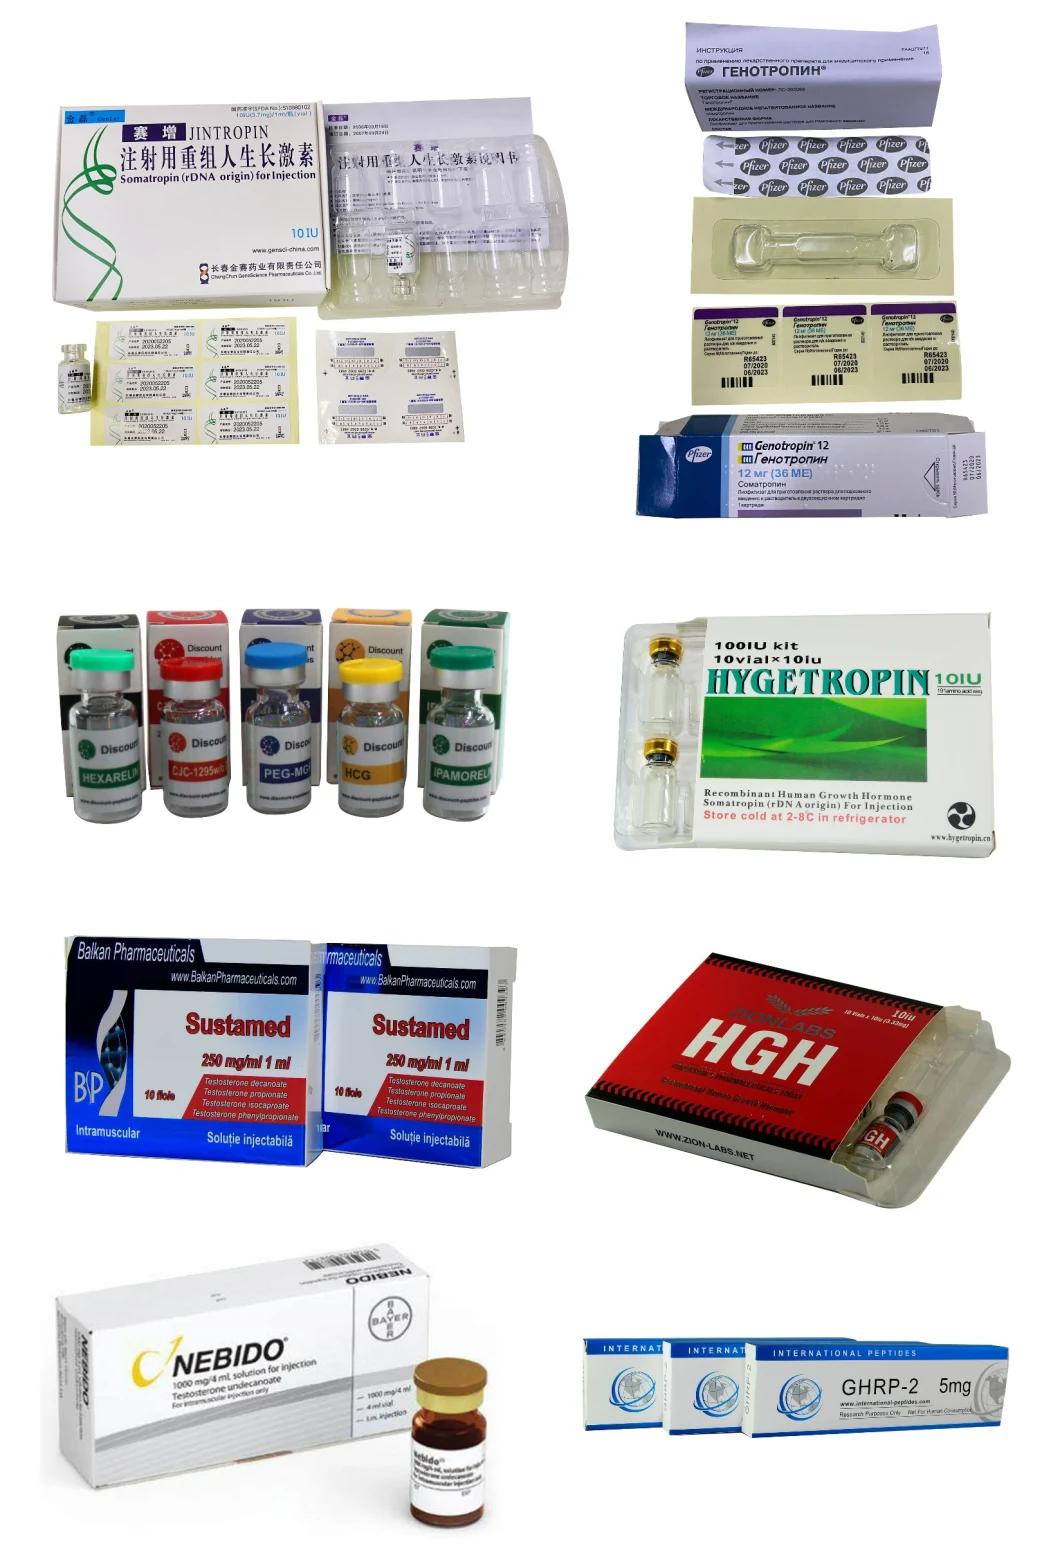 HGH Plastic Tray Package 2ml Vial HGH Packaging Boxes